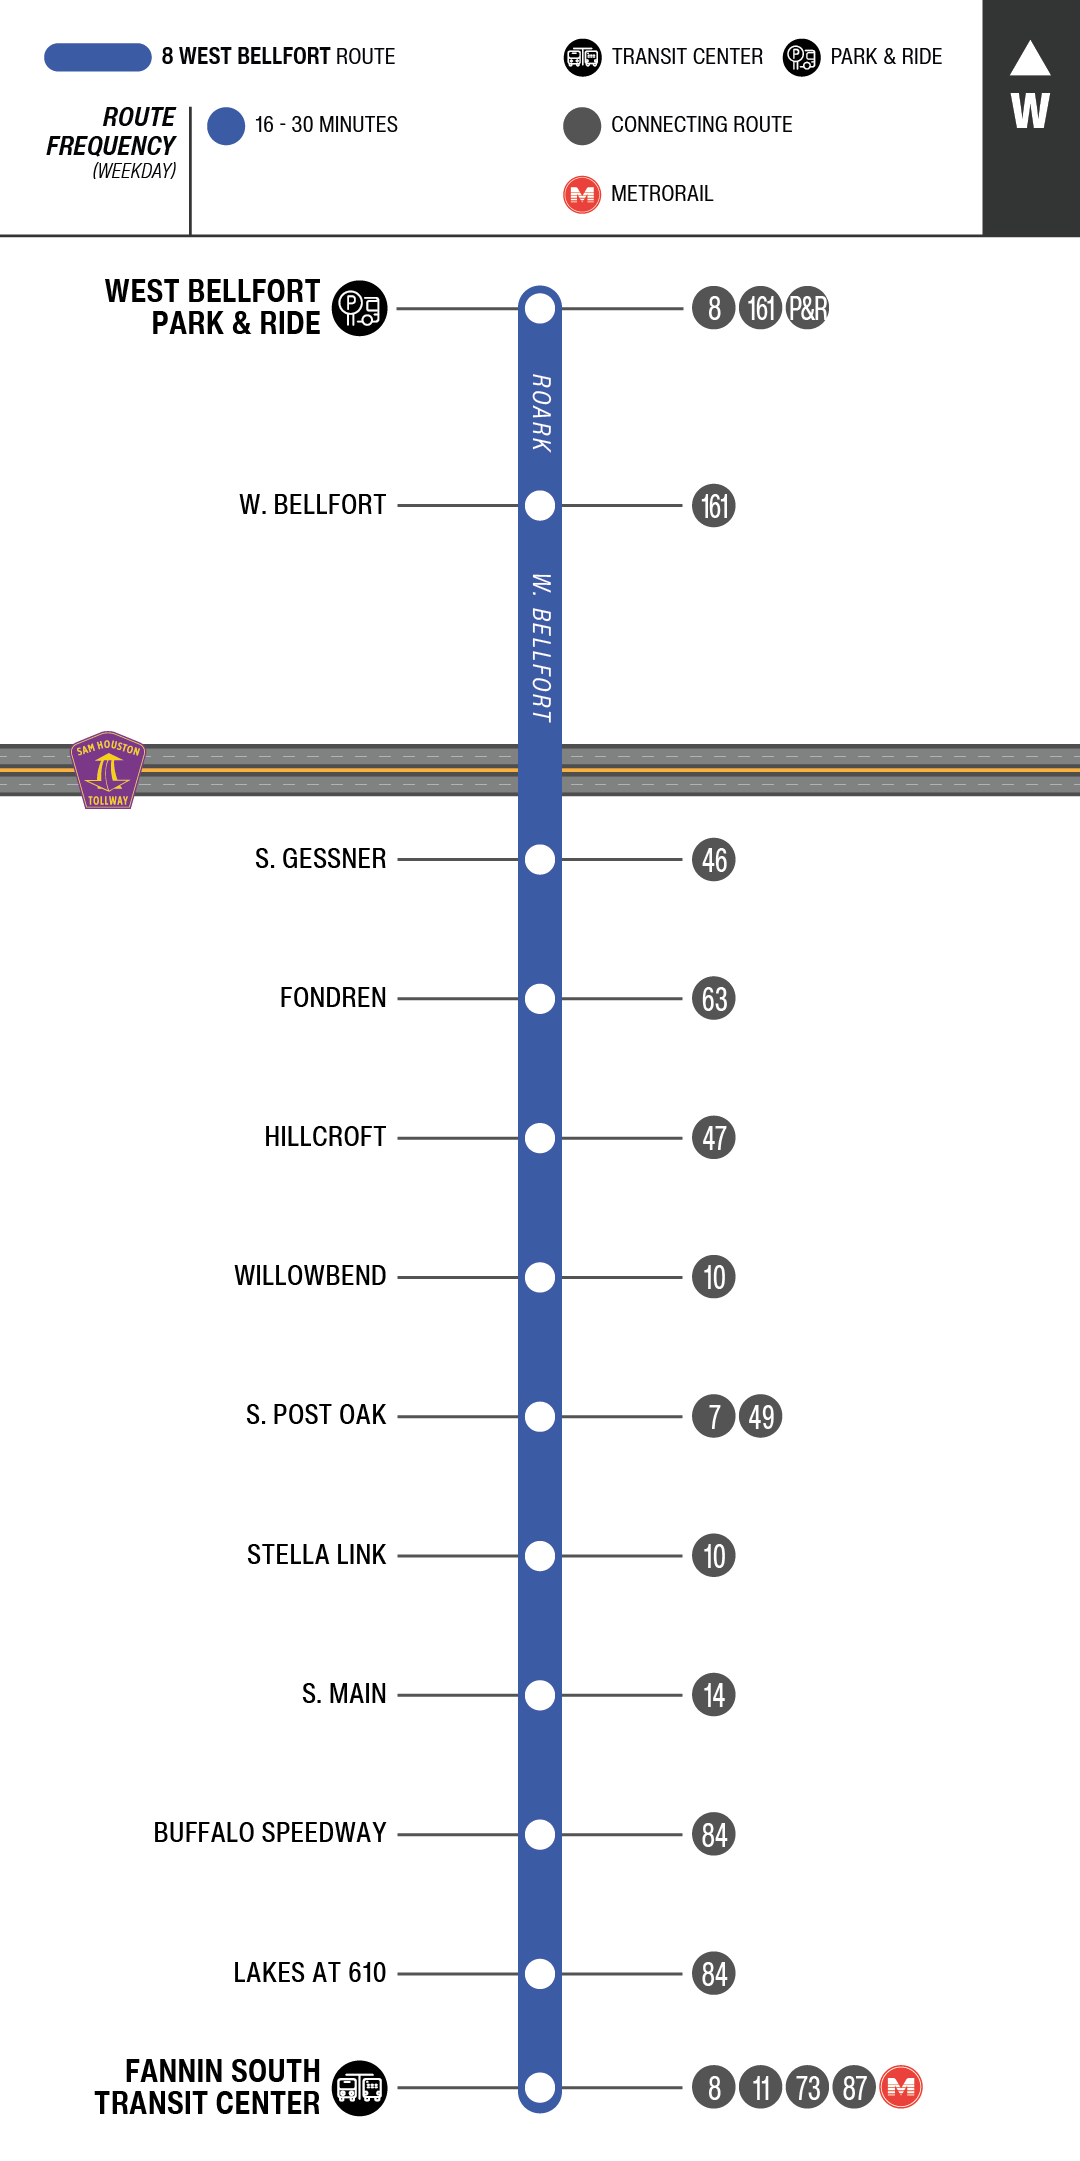 Route map for 8 West Bellfort bus